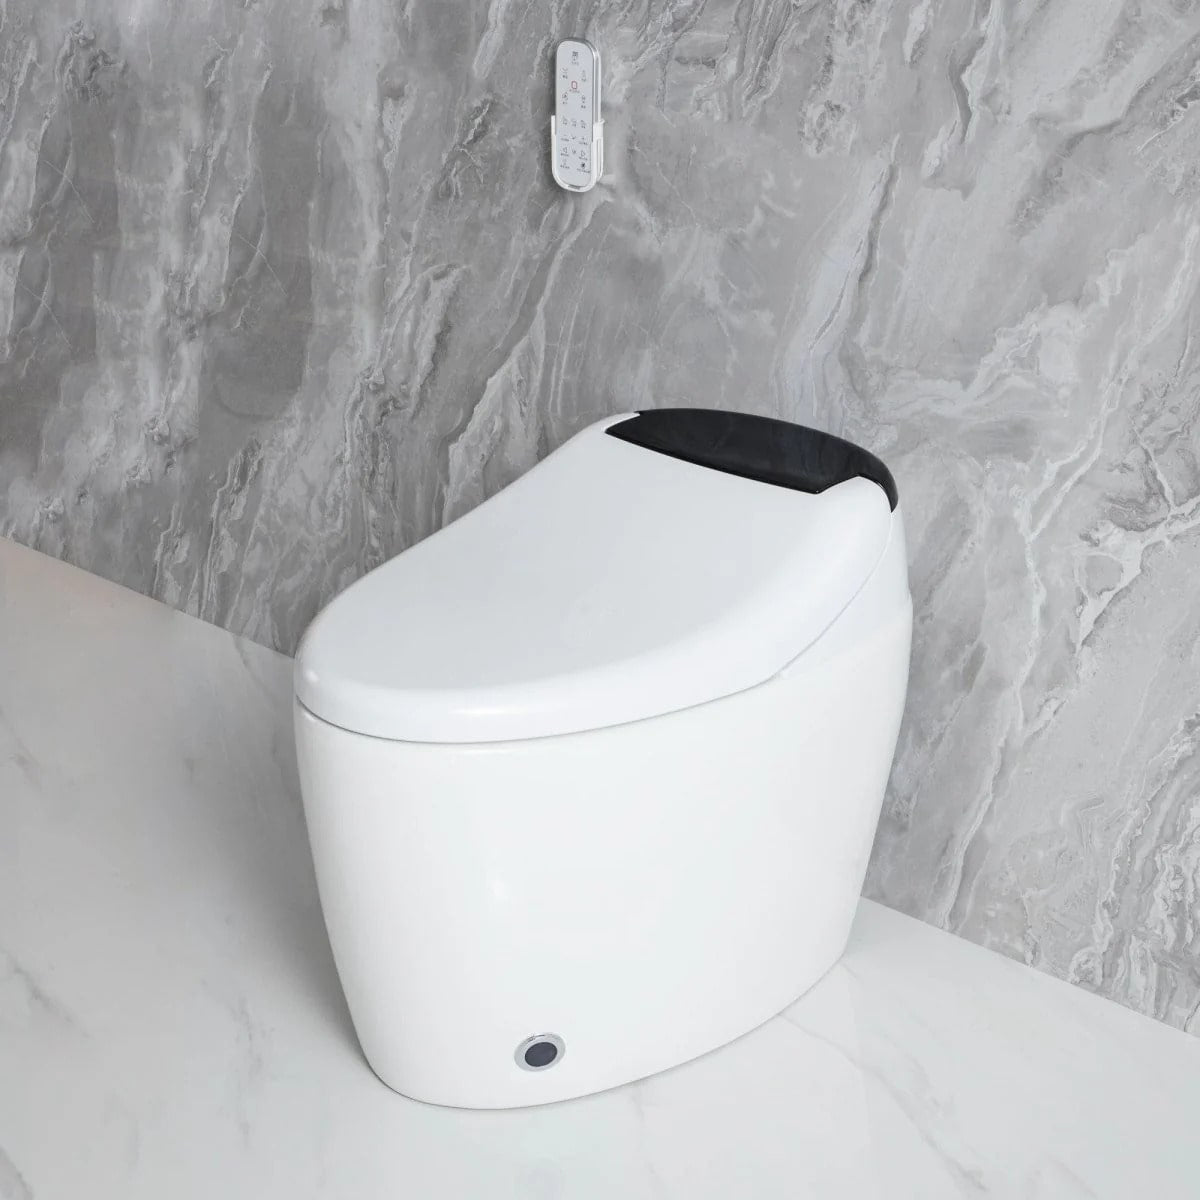 Luxury Self Cleaning Bidet Toilet with Remote Control